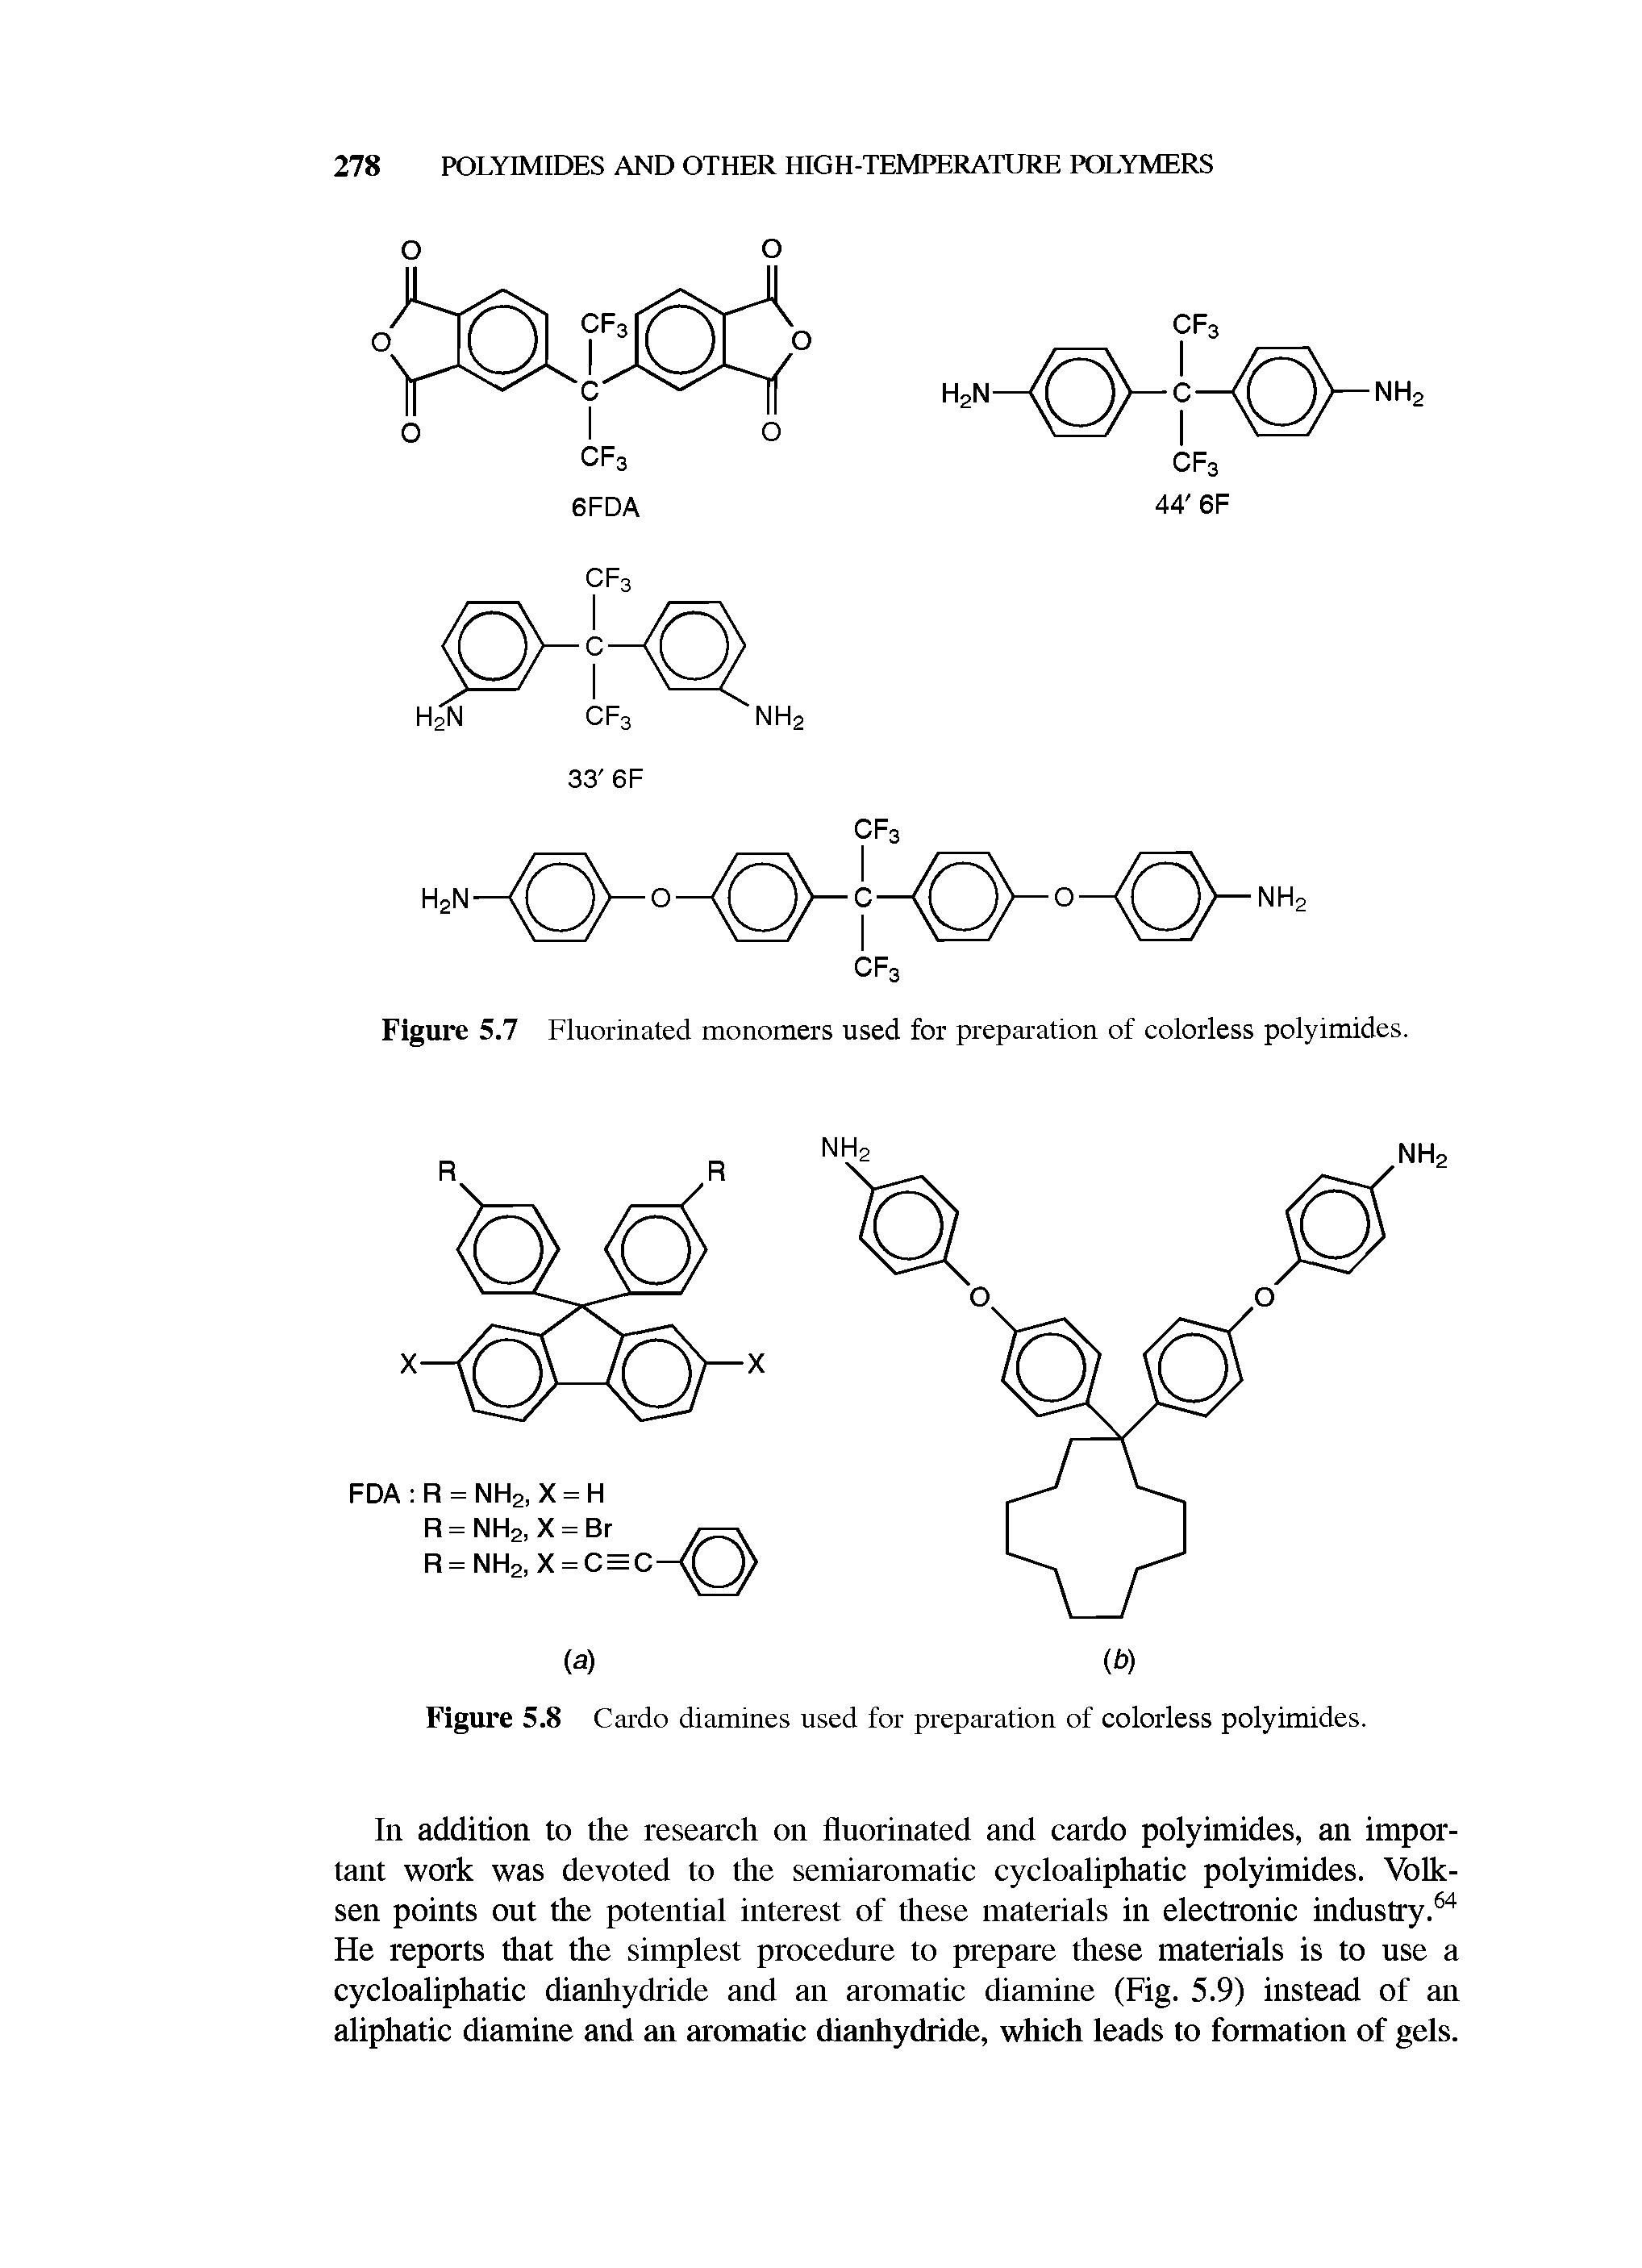 Figure 5.7 Fluorinated monomers used for preparation of colorless polyimides.